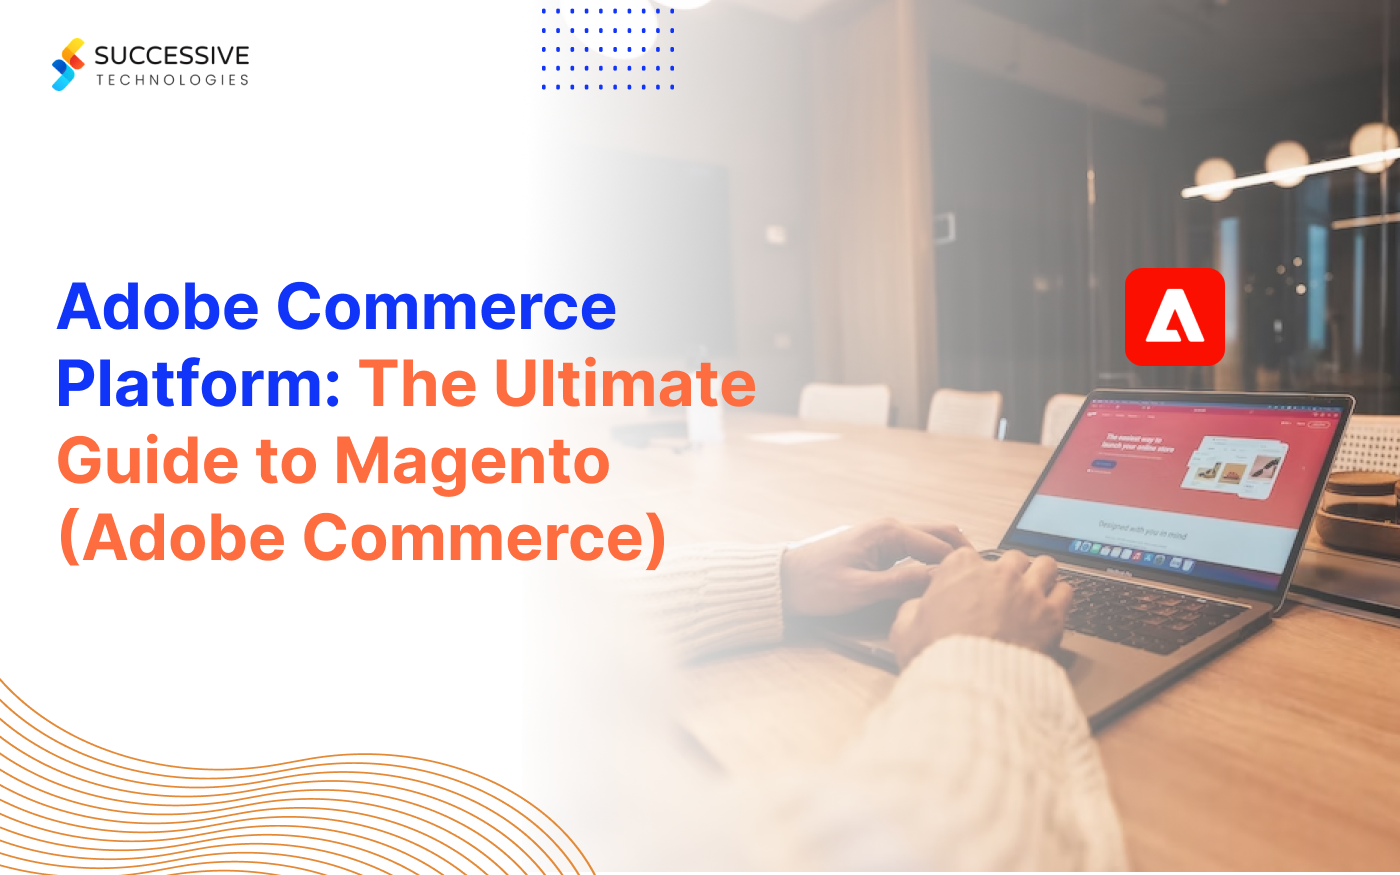 Adobe Commerce Platform: The Ultimate Guide to Magento (Adobe Commerce)